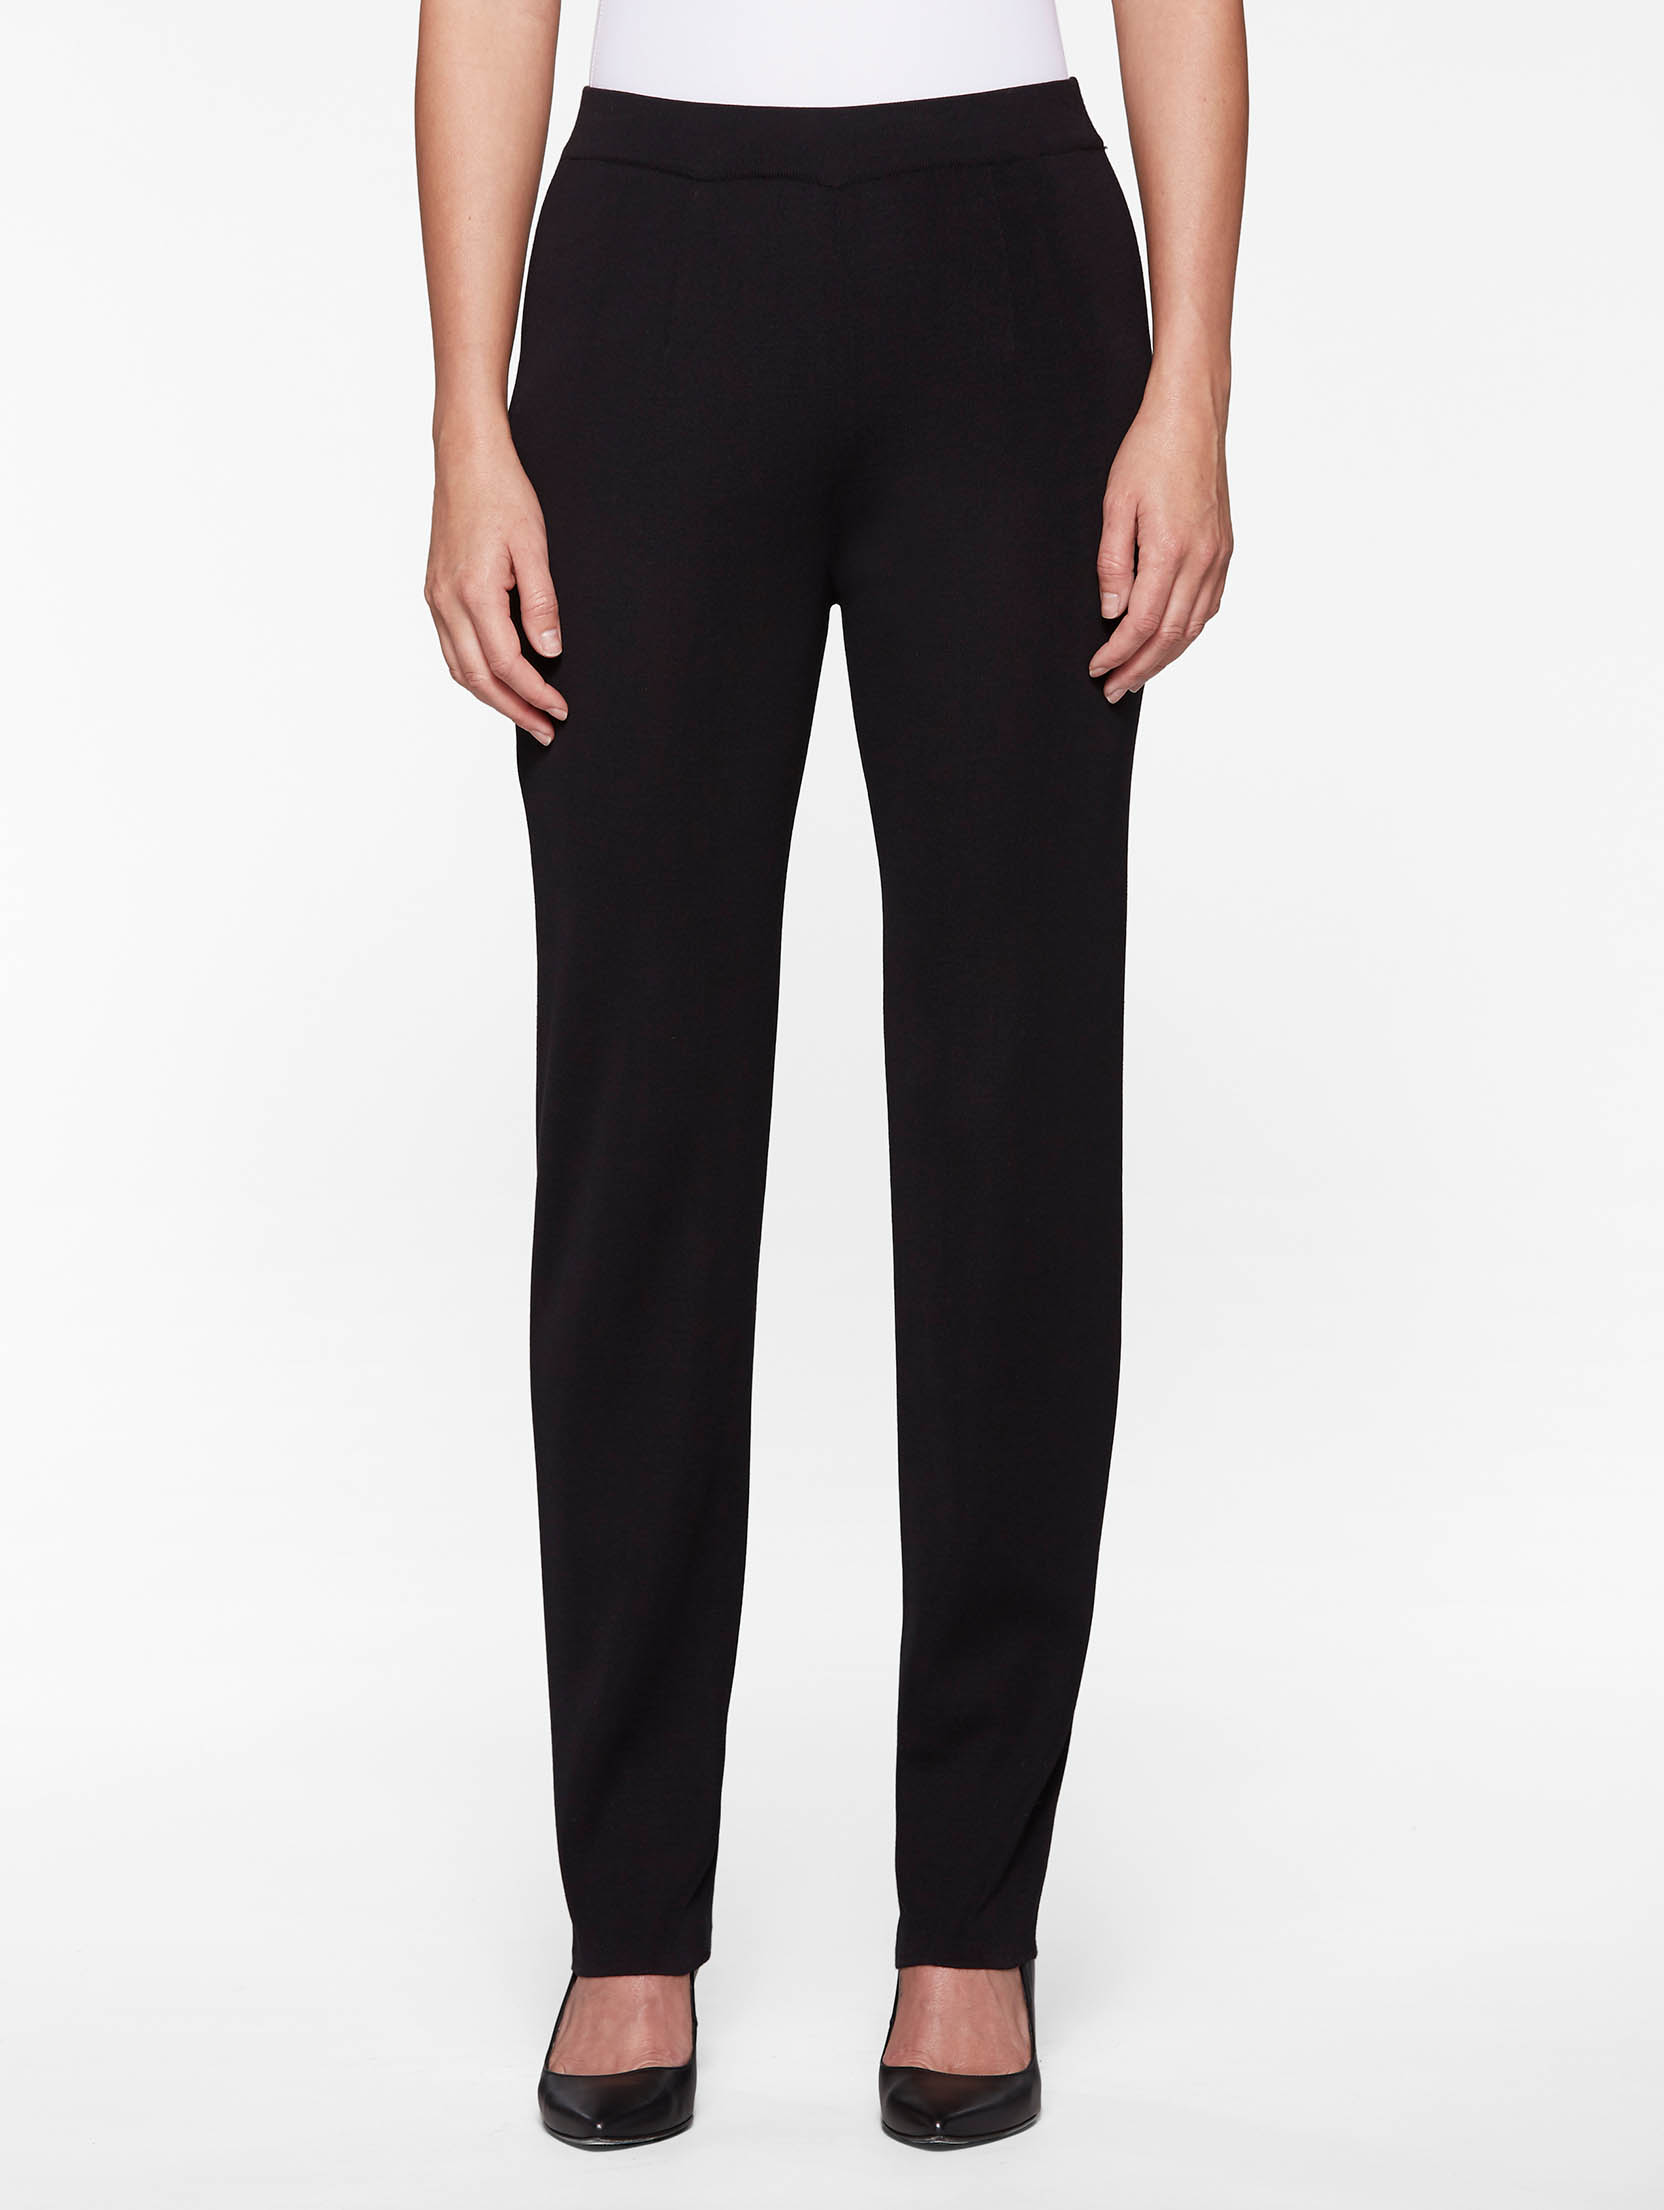 Style & Co. Petite Knit Skimmer Pants in Black